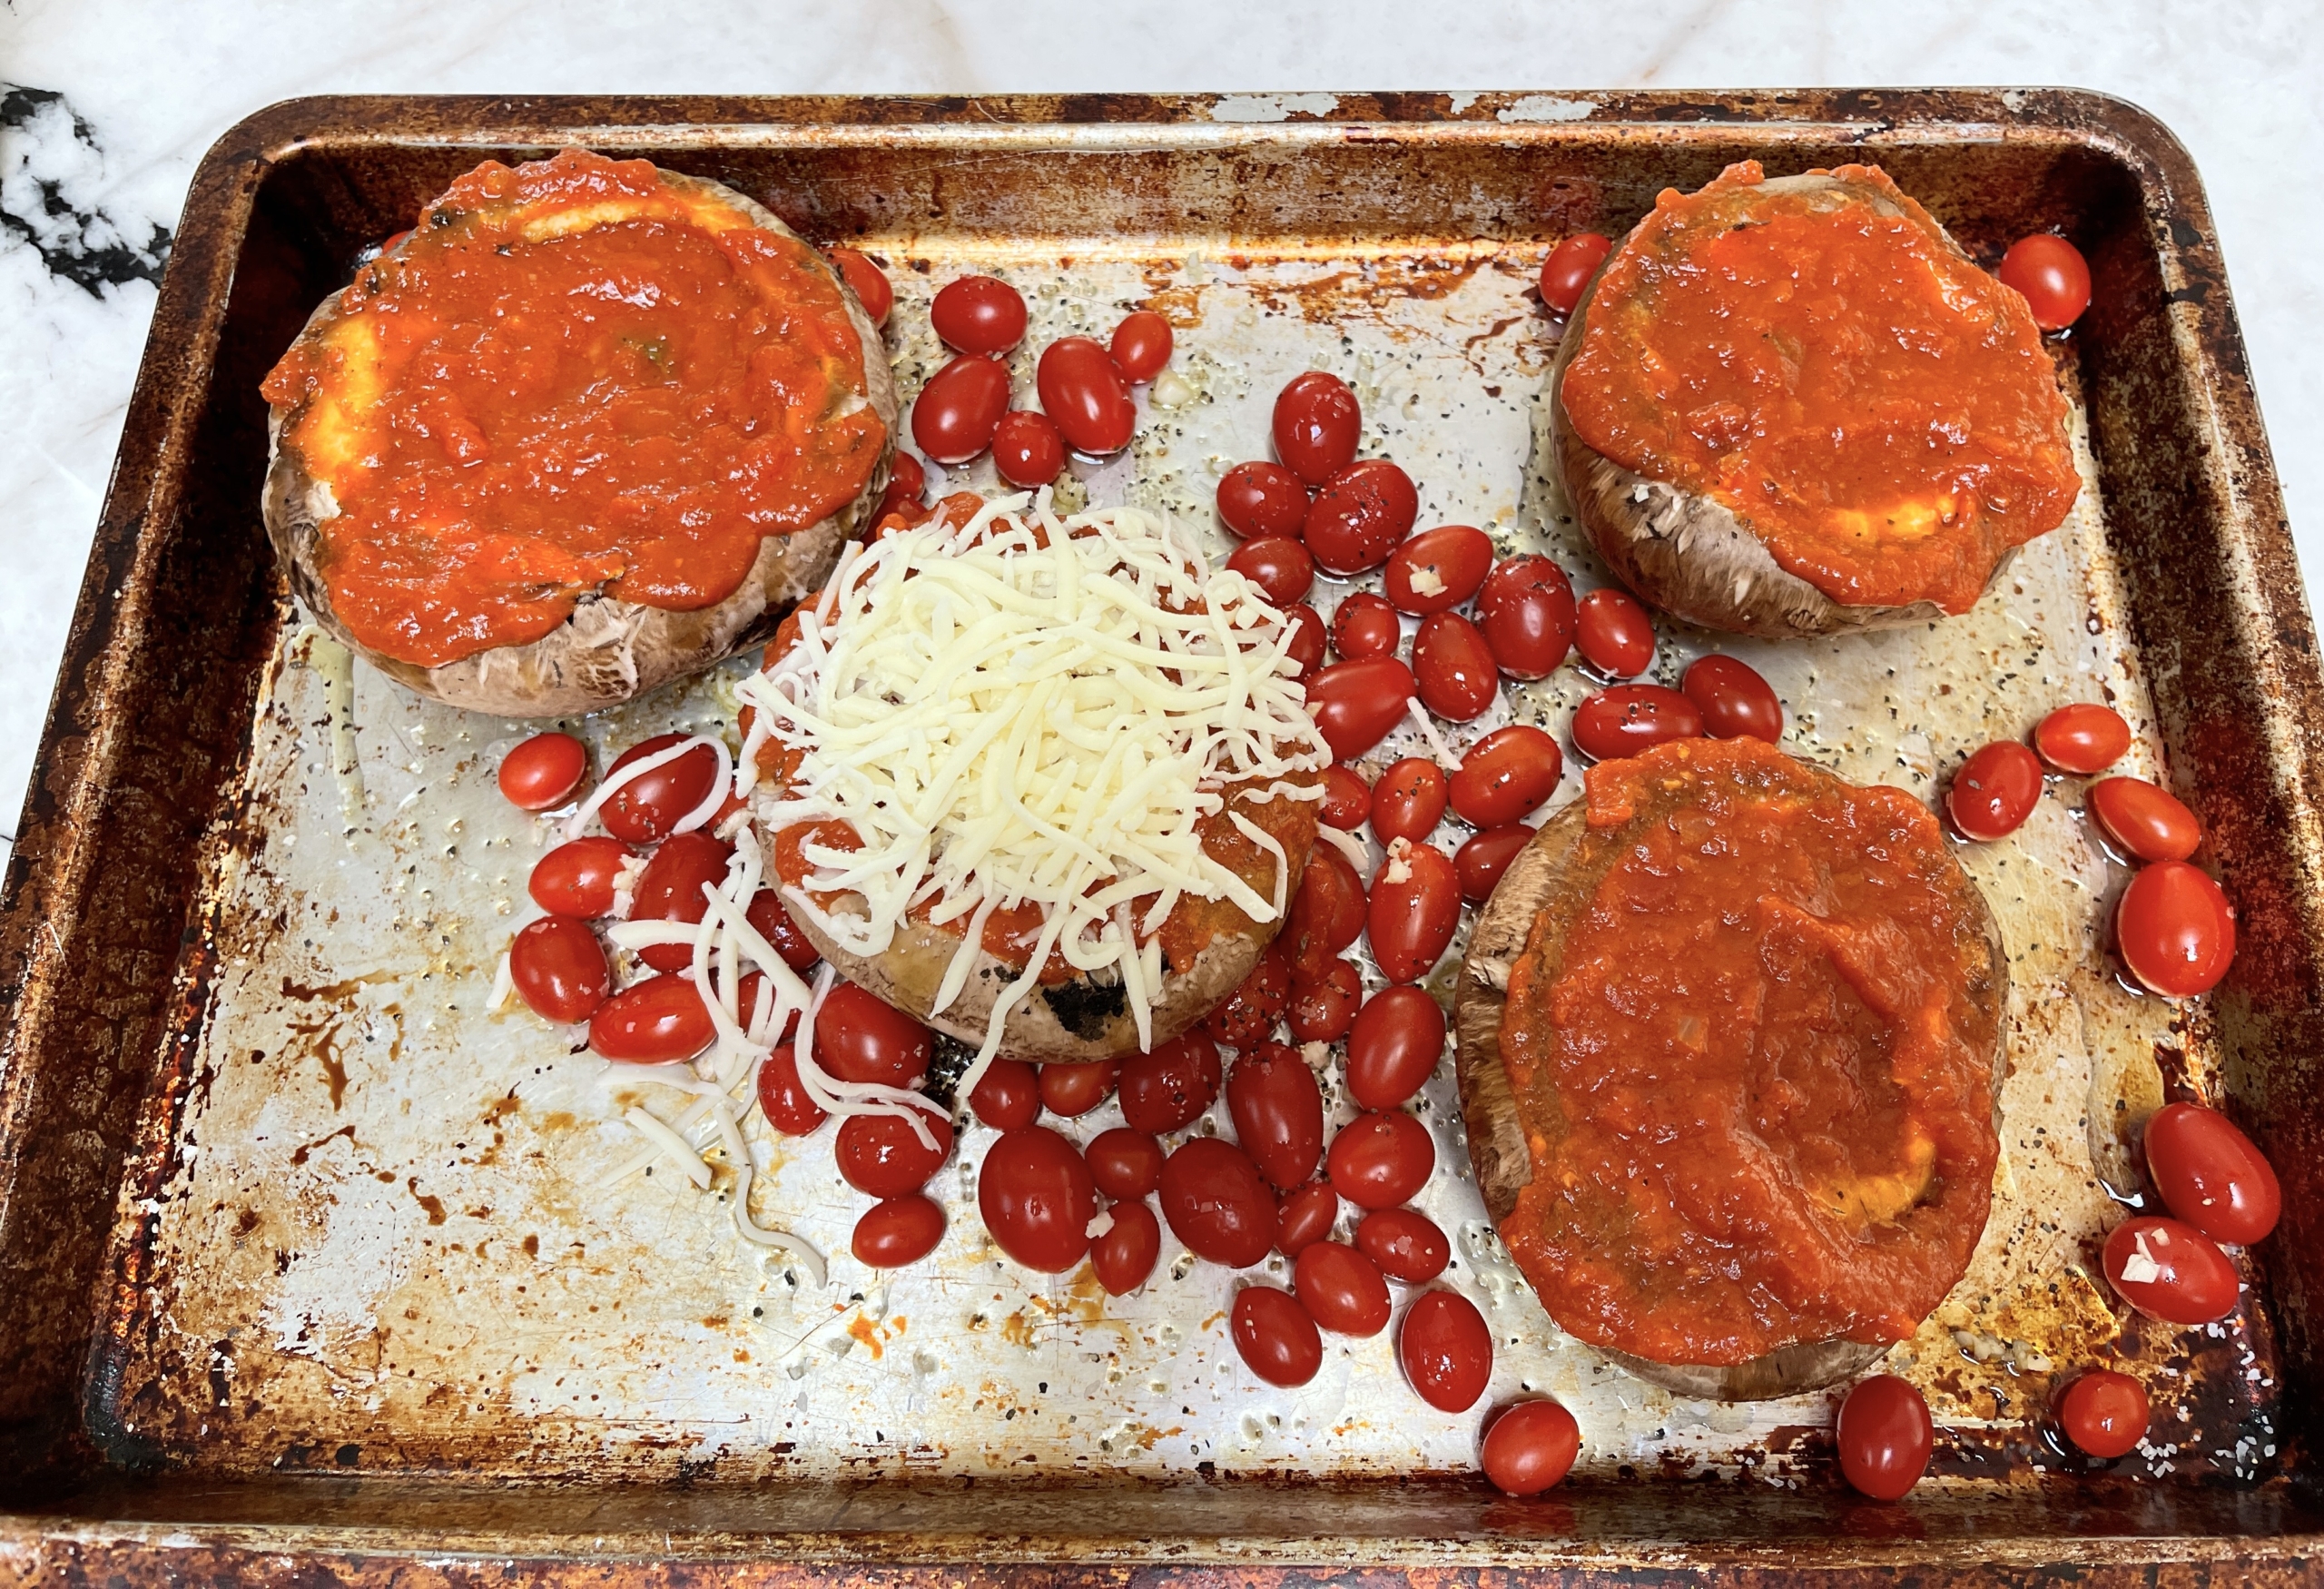 Scatter remaining garlic over the mushrooms and fill each cap with marinara sauce and cheese